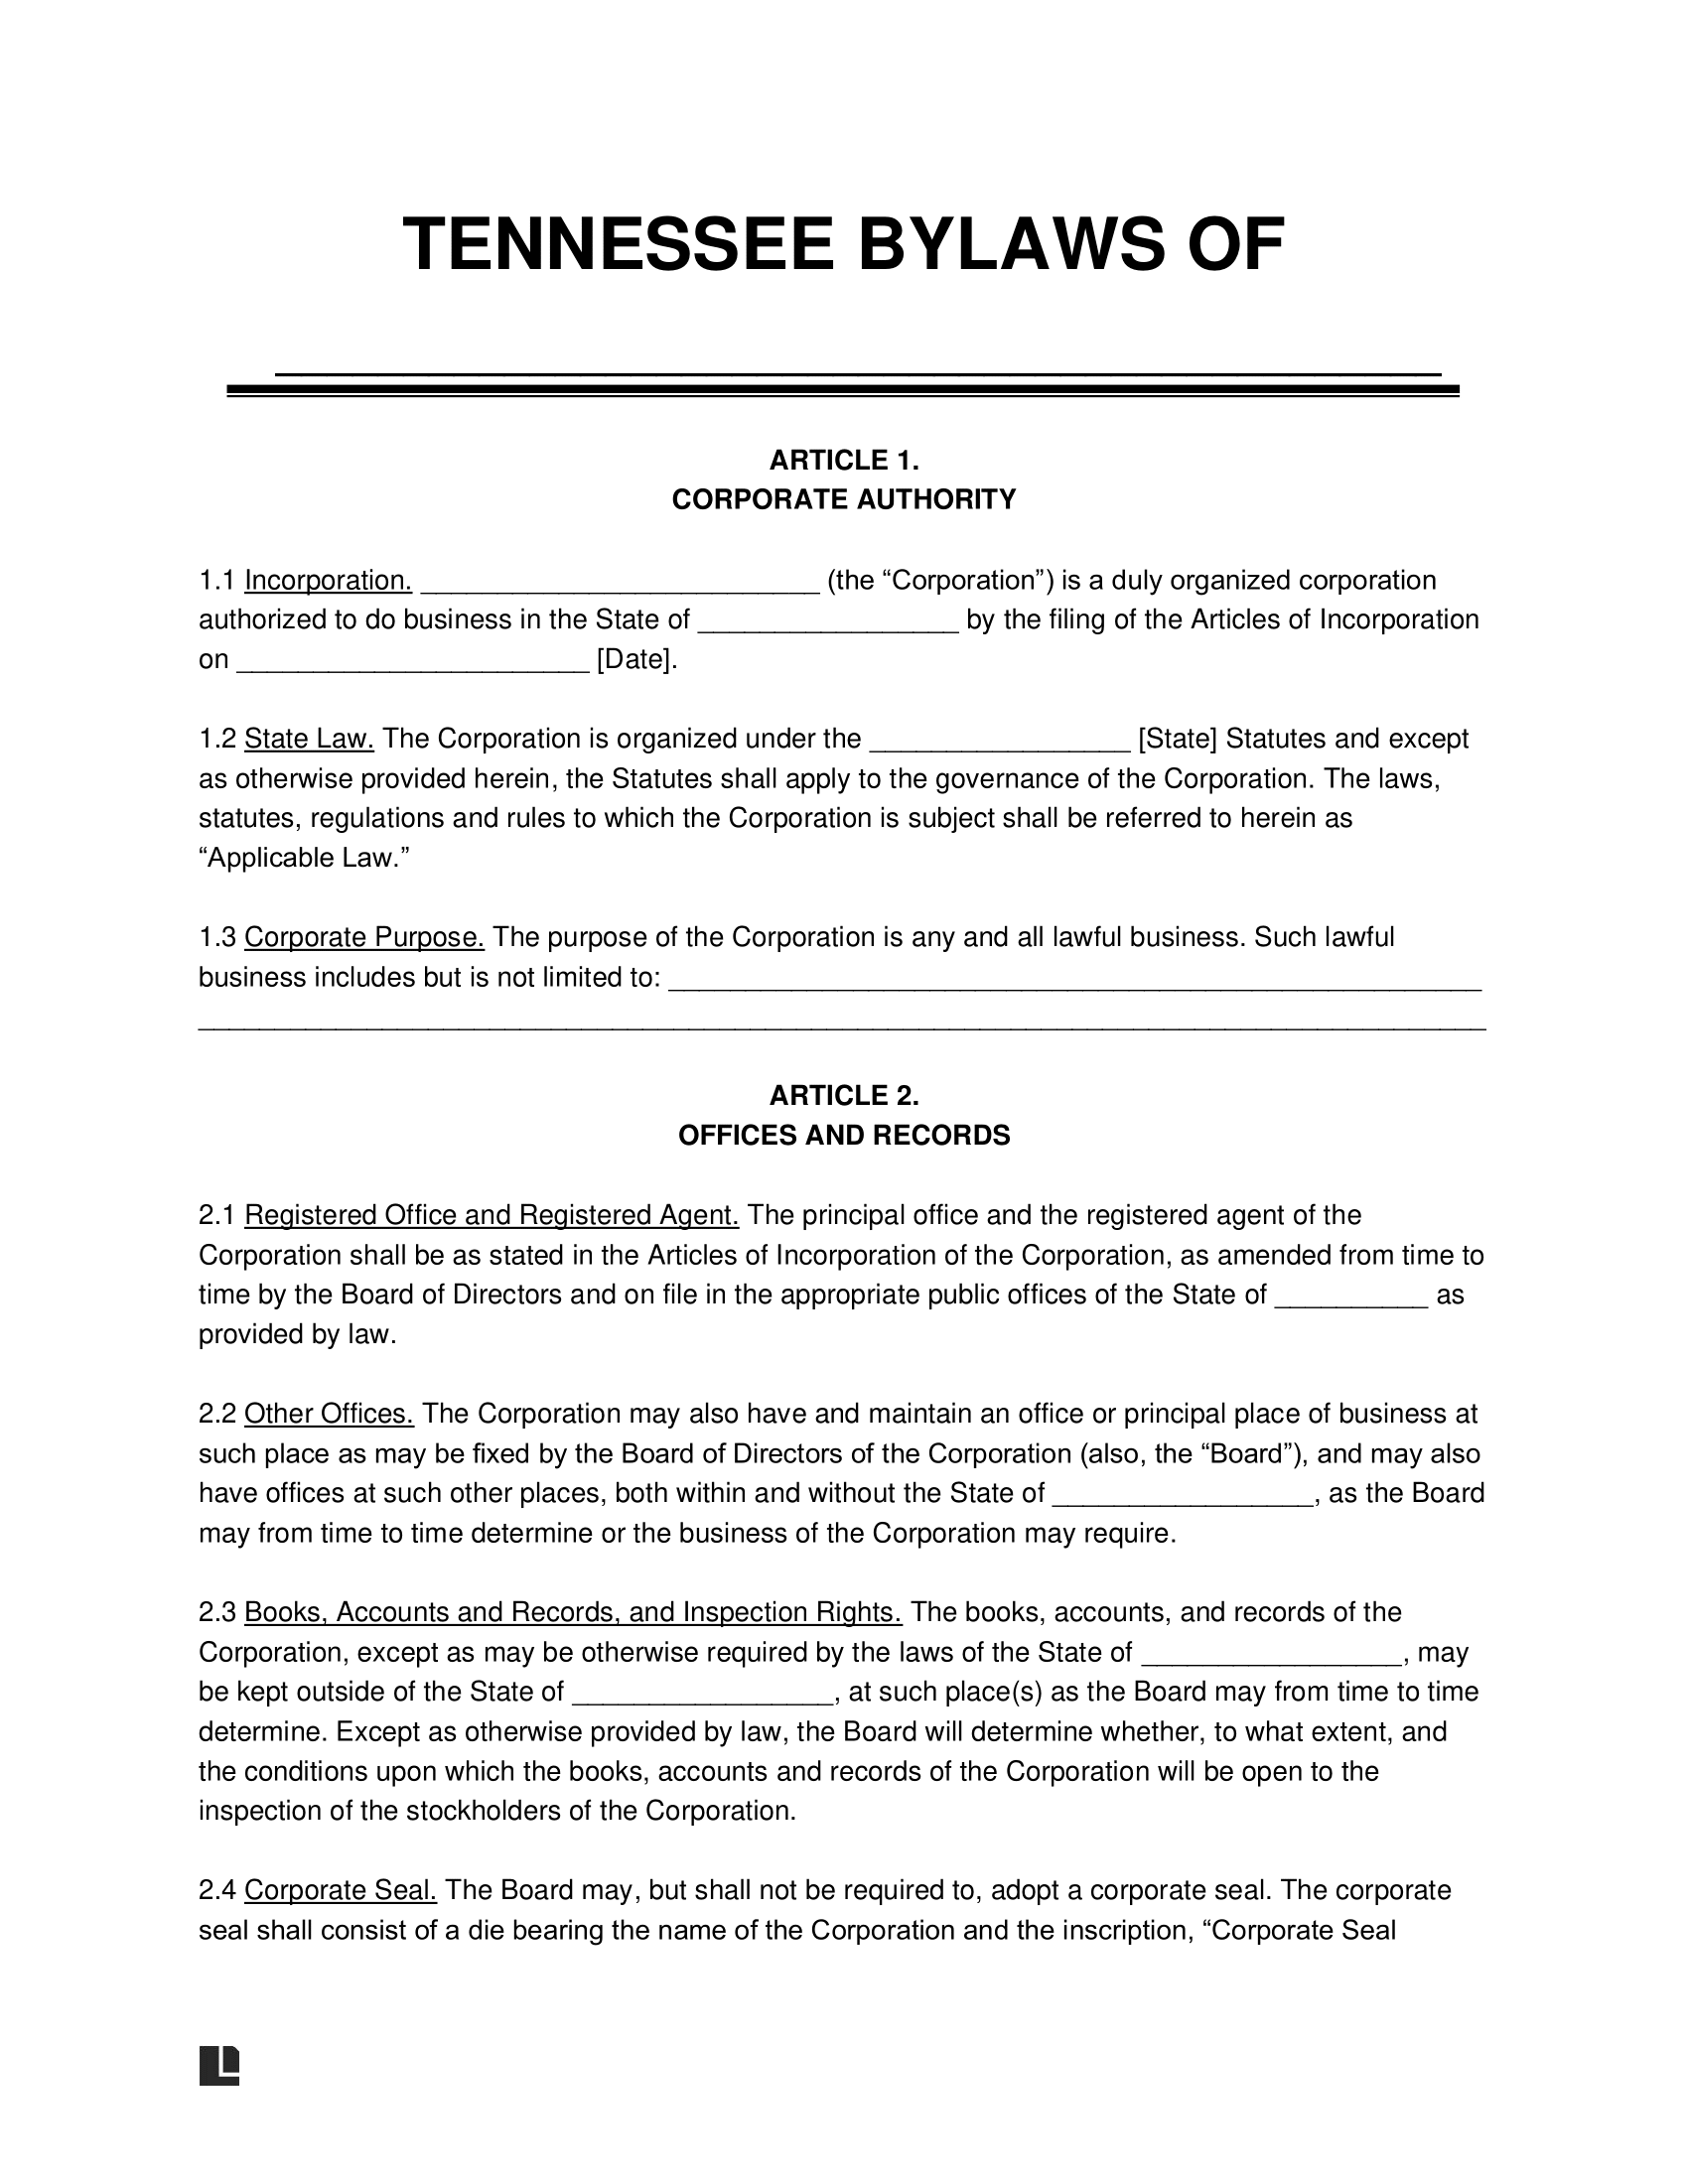 Tennessee Corporate Bylaws Template